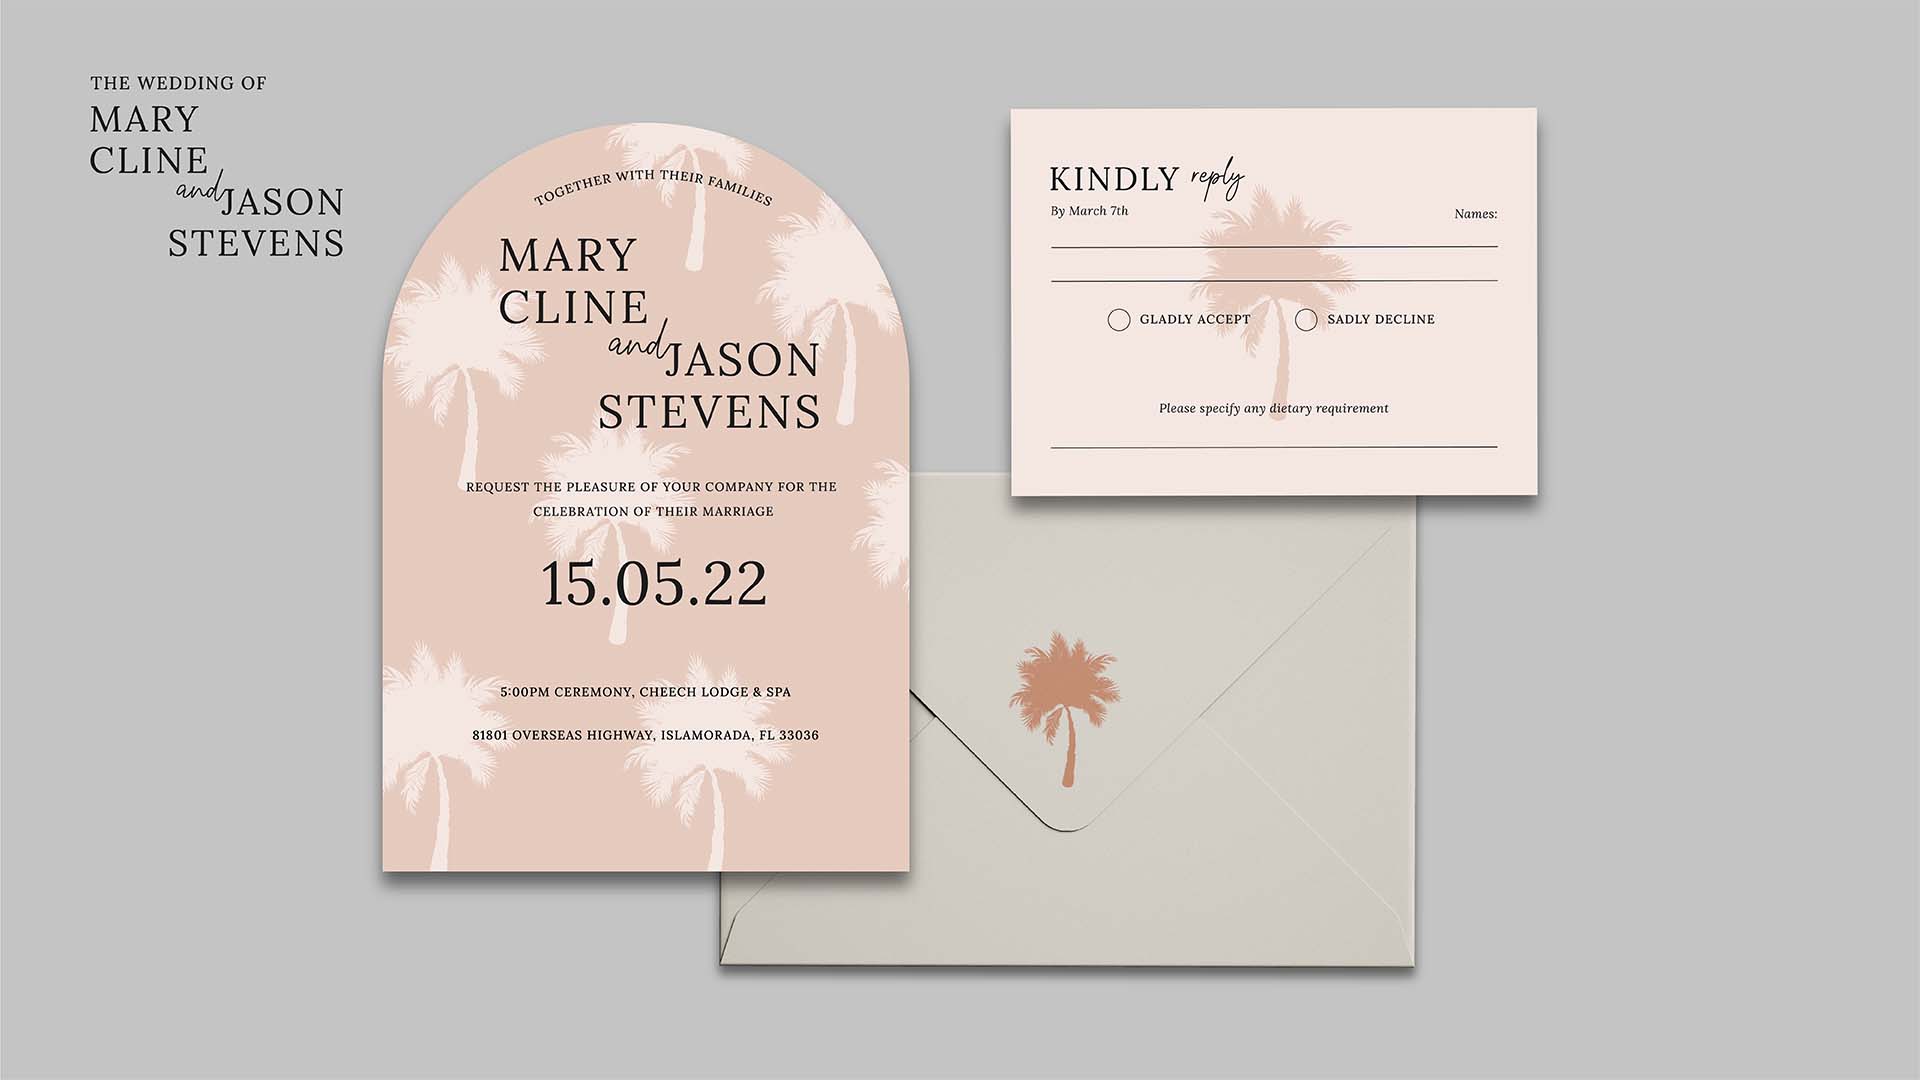  / Wedding stationery, various sizes, 2021. This wedding stationery acts as a set of cohesive, themed designs, that set the tone and the theme for the wedding of Mary and Jason.